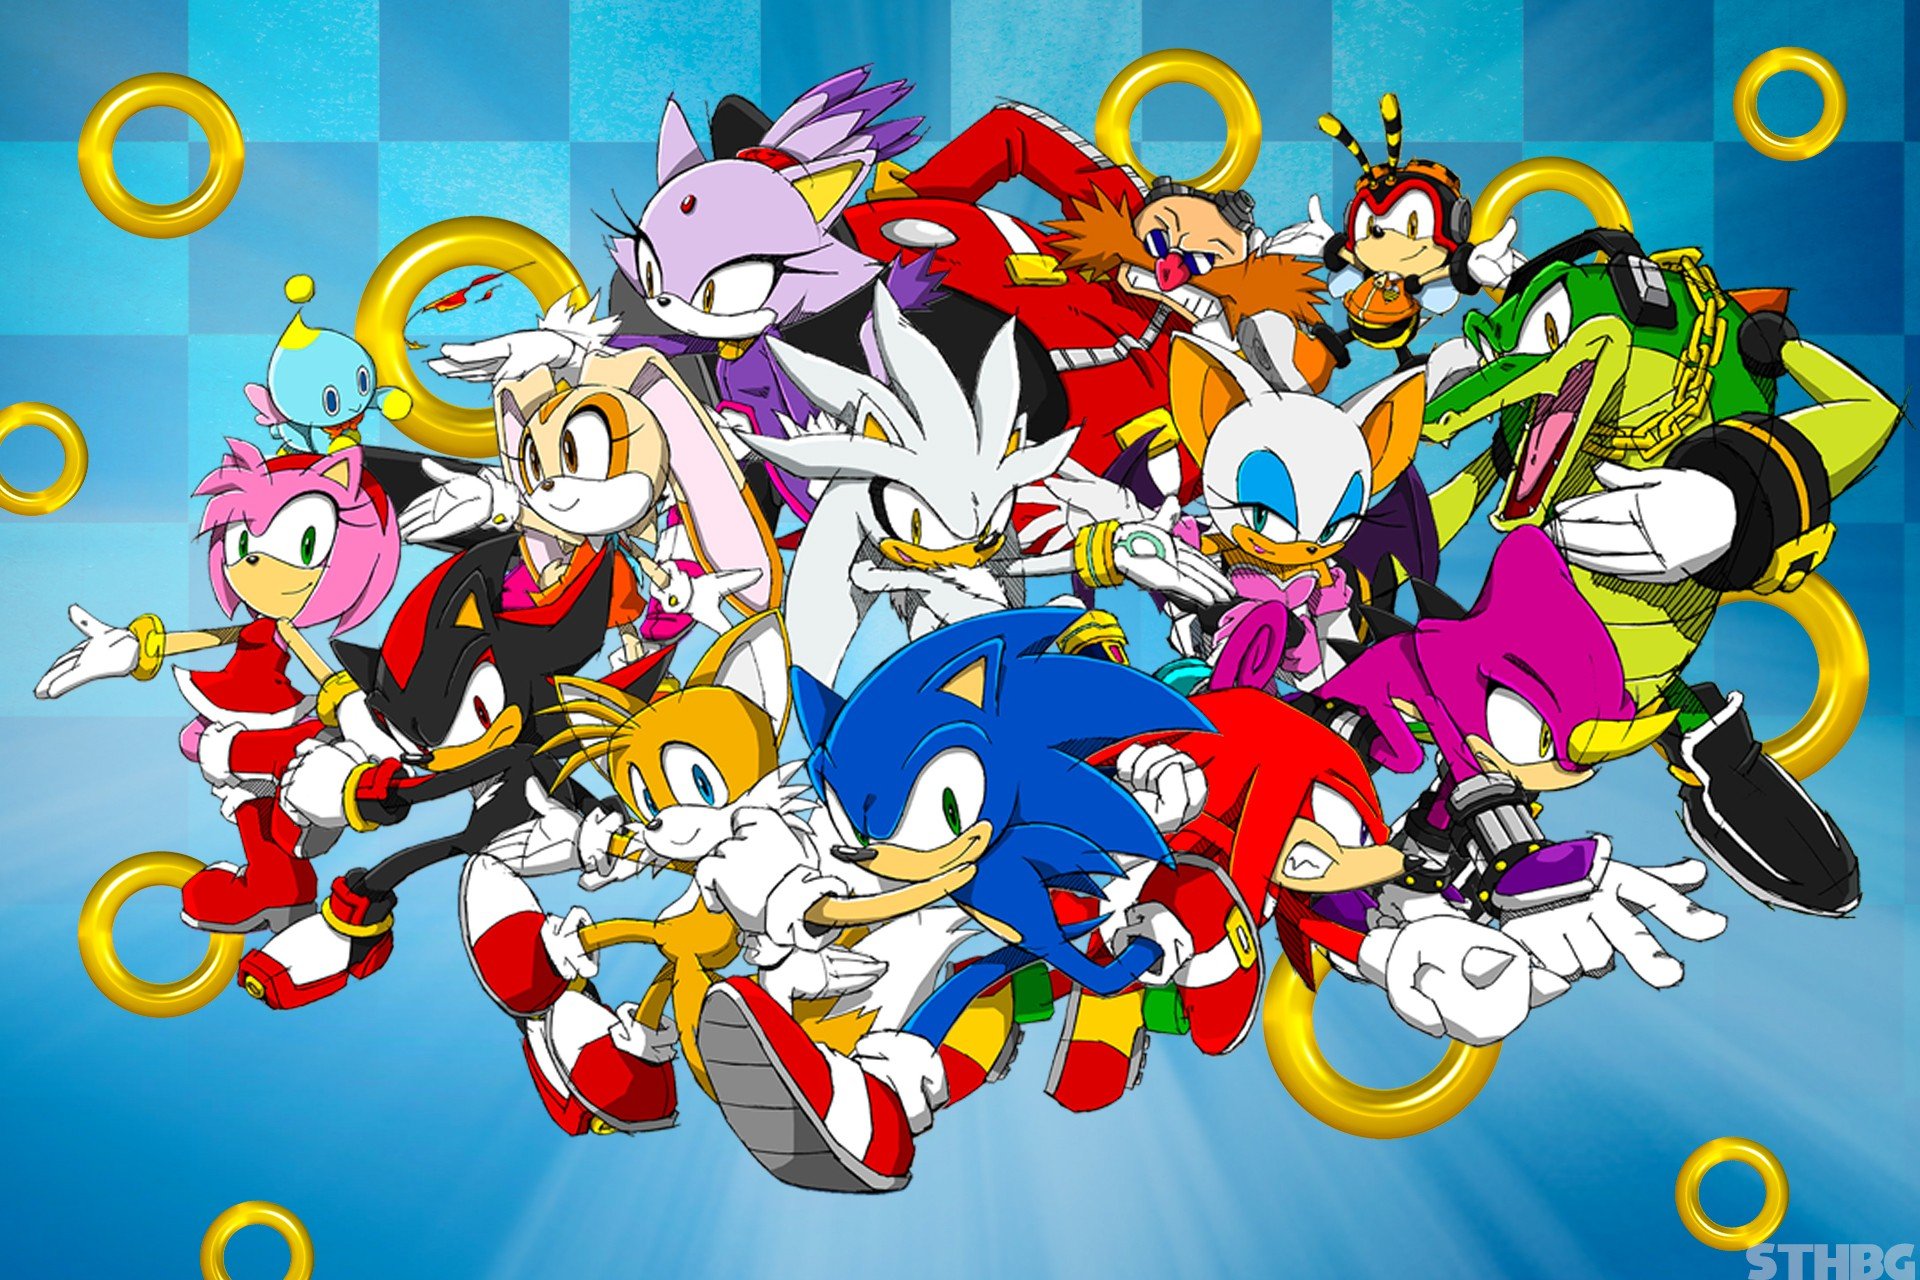 Tails (character), Sonic, Sonic the Hedgehog, Shadow the Hedgehog, Knuckles Wallpaper